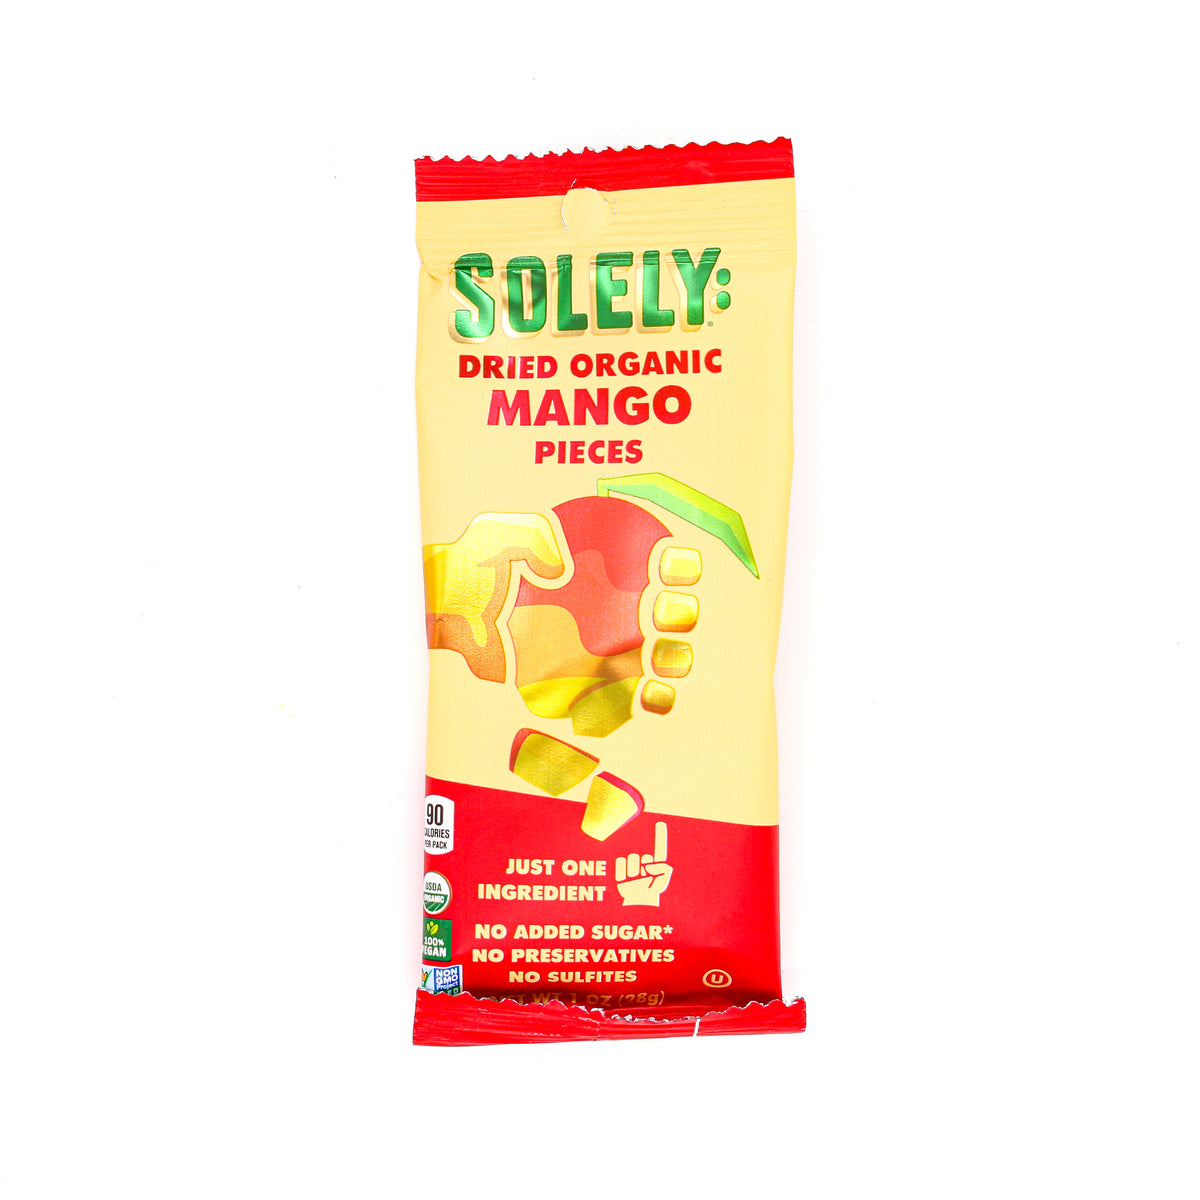 Solely Dried Mango Pieces